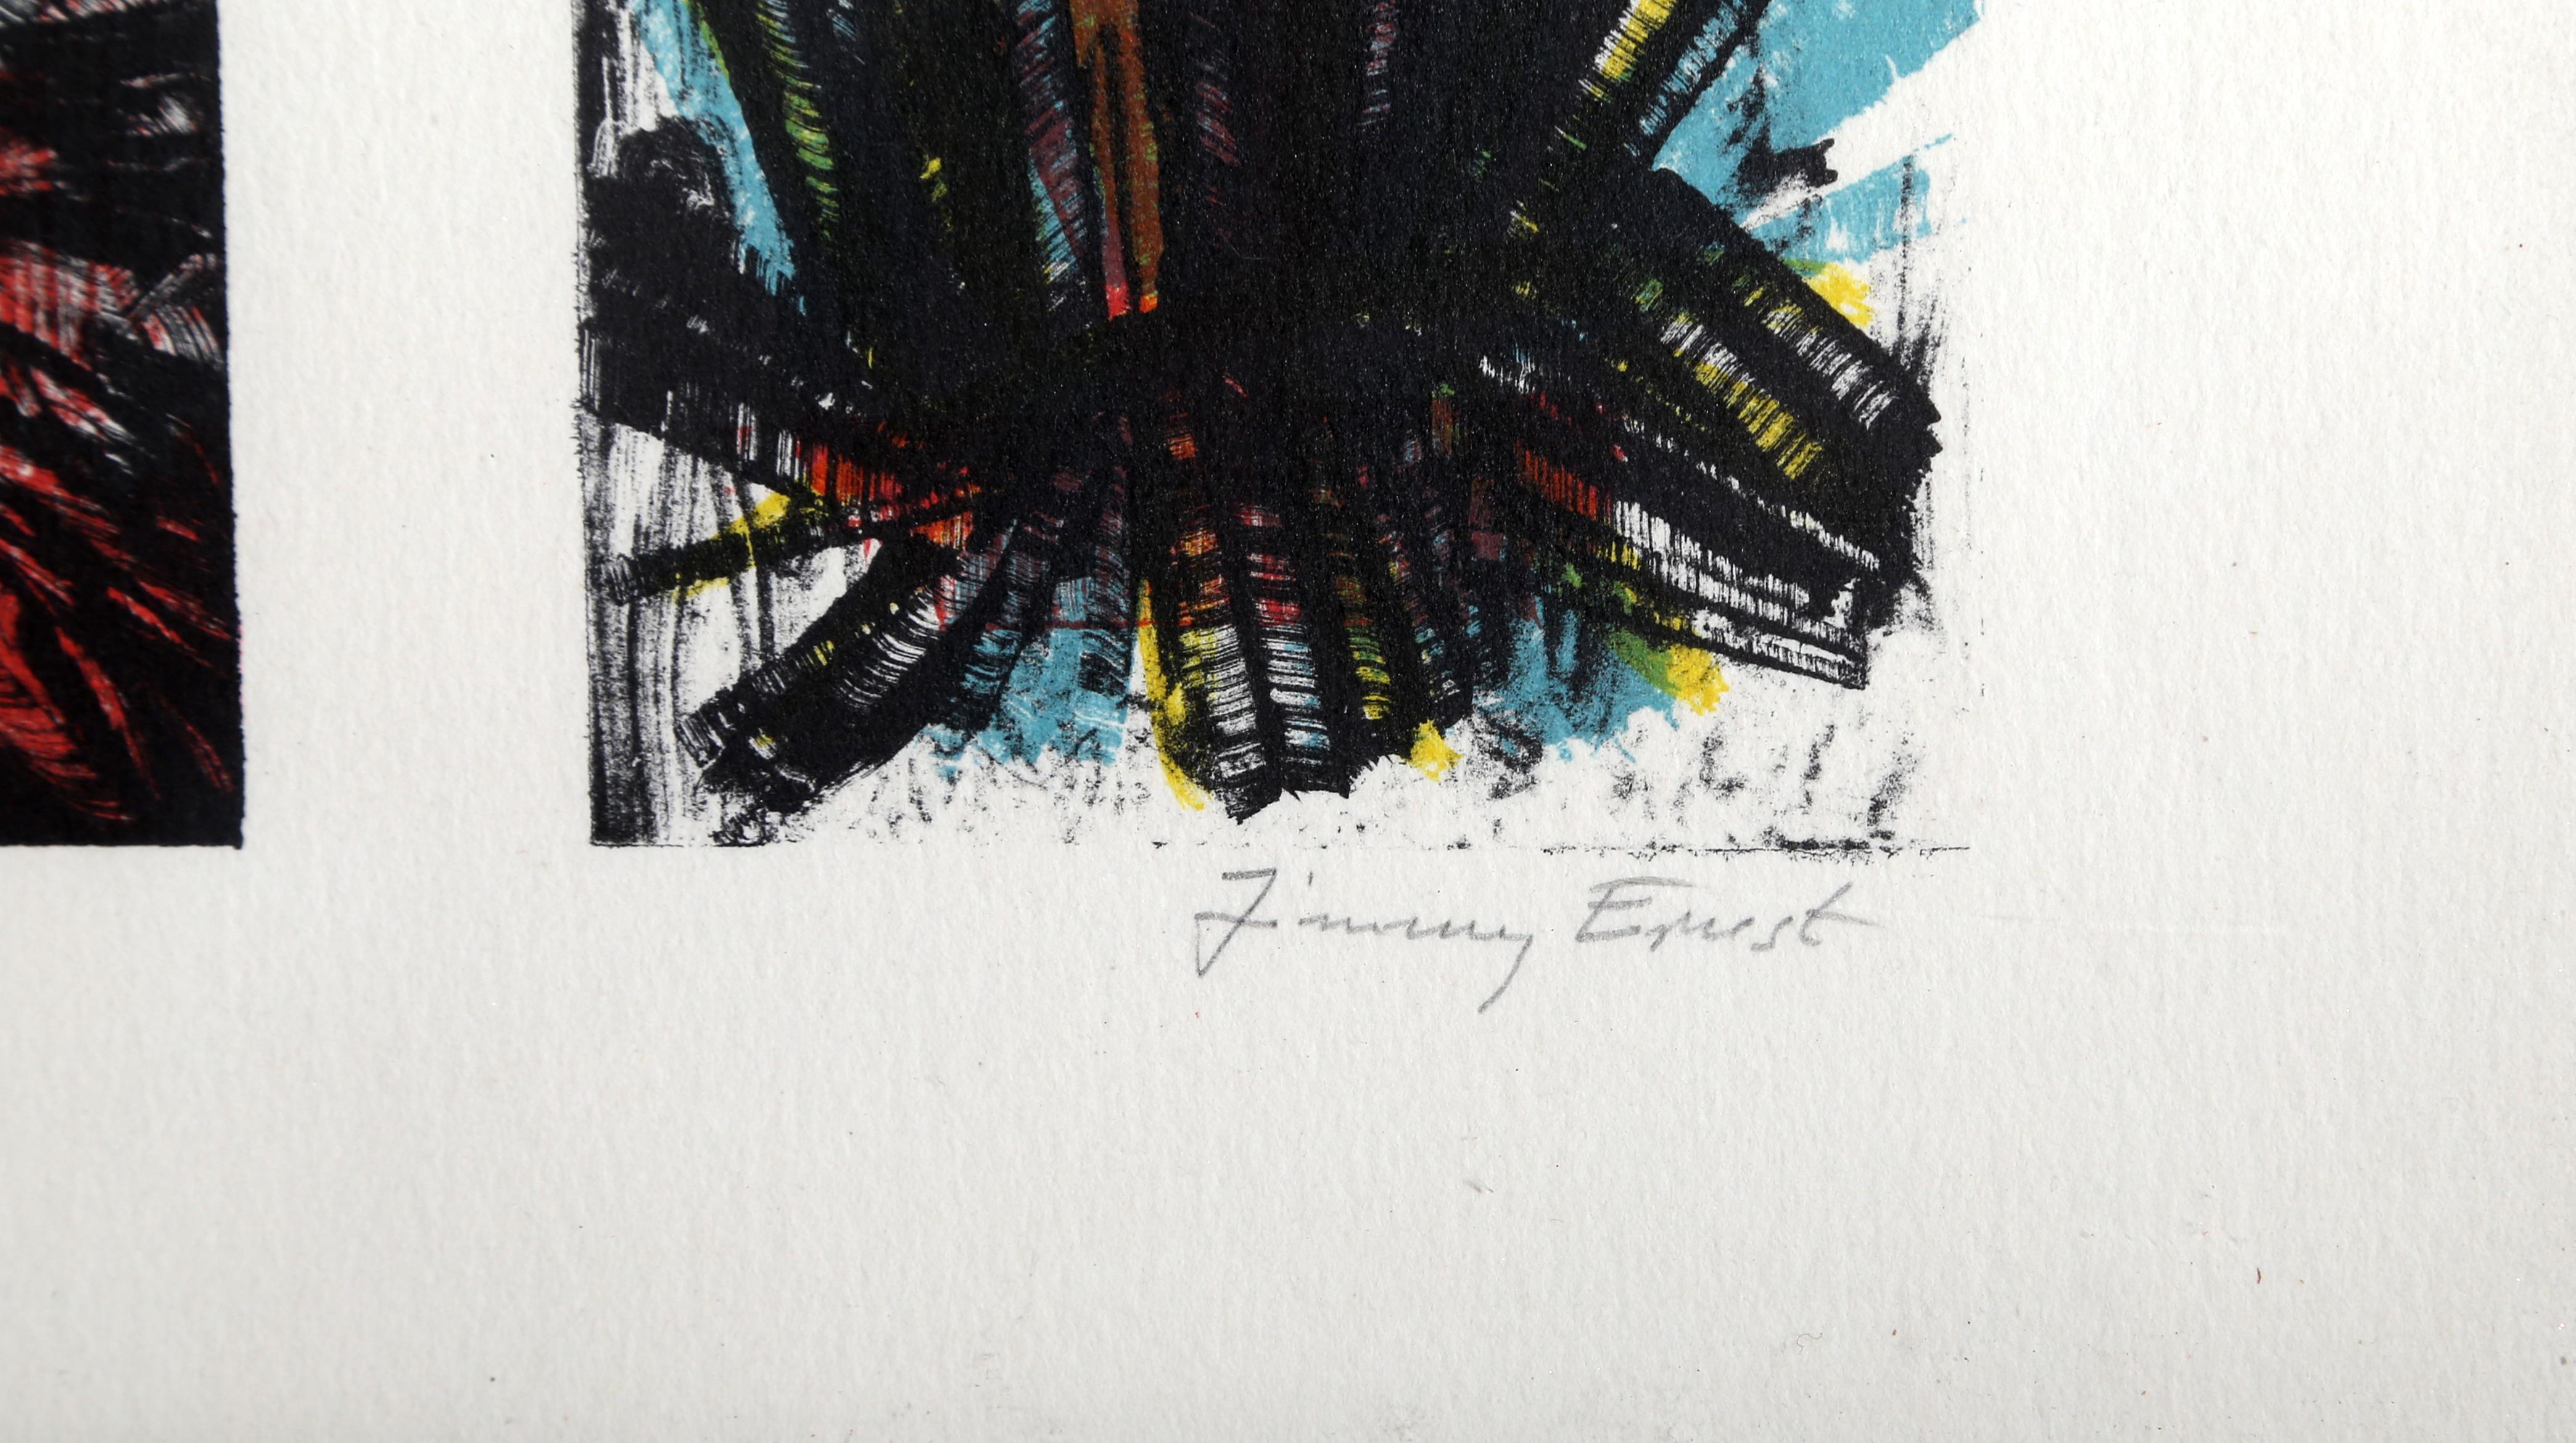 Terra Incognita 13, Lithograph by Jimmy Ernst 2